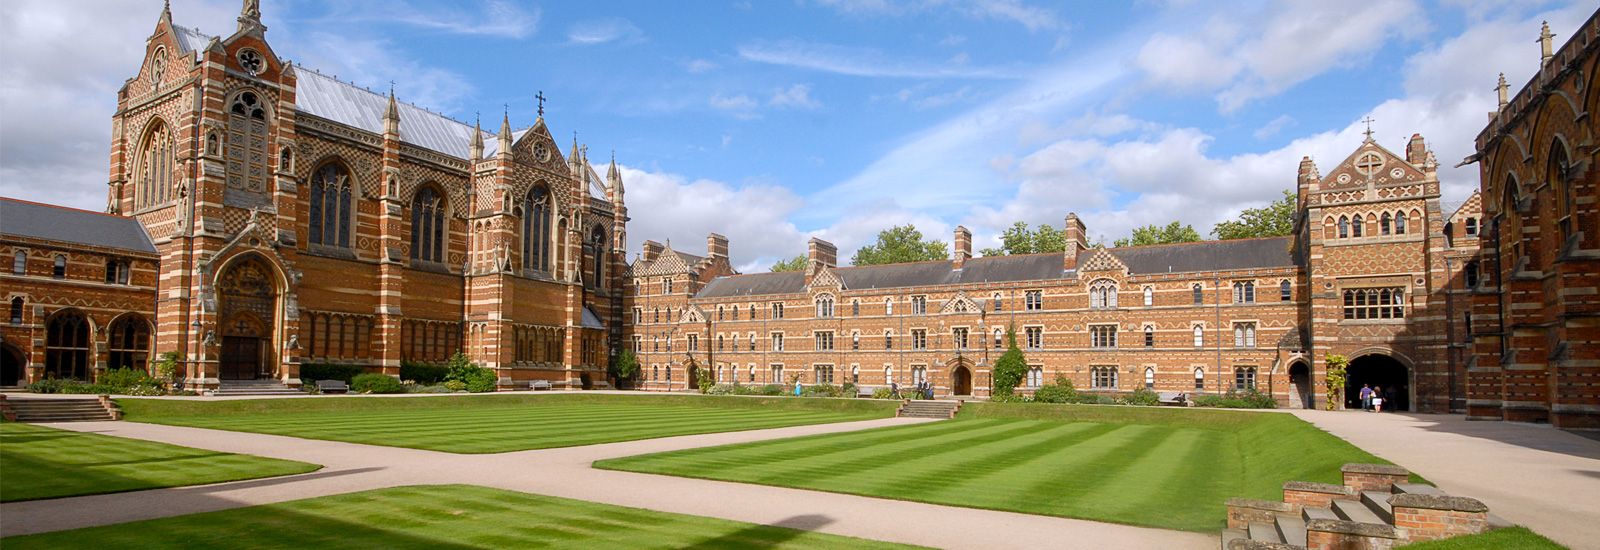 A quad at Keble College with the chapel on the left